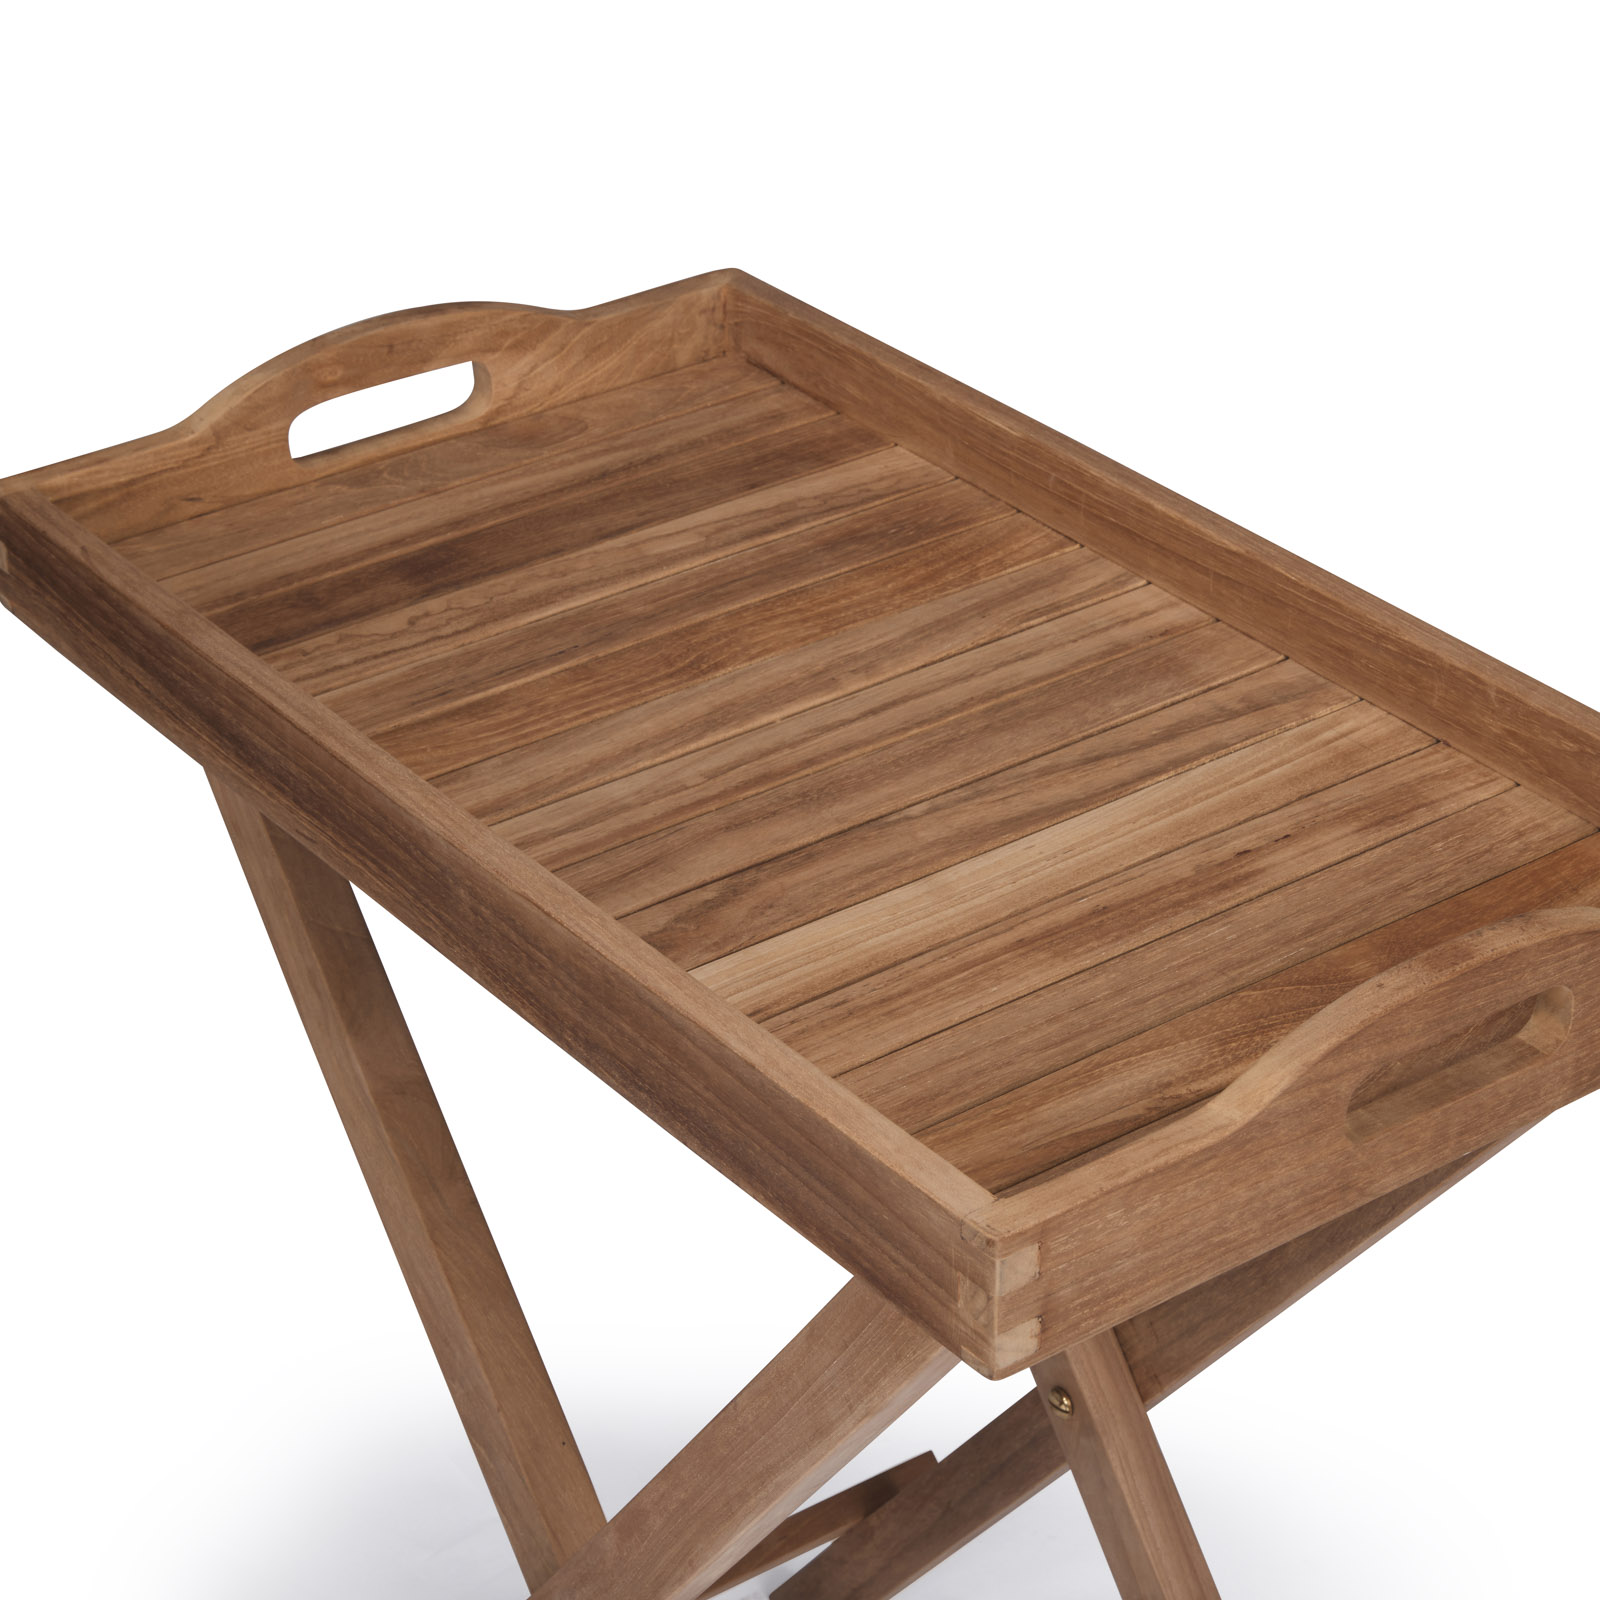 Teak Serving Tray with Stand | Patio Furniture | Teak Warehouse